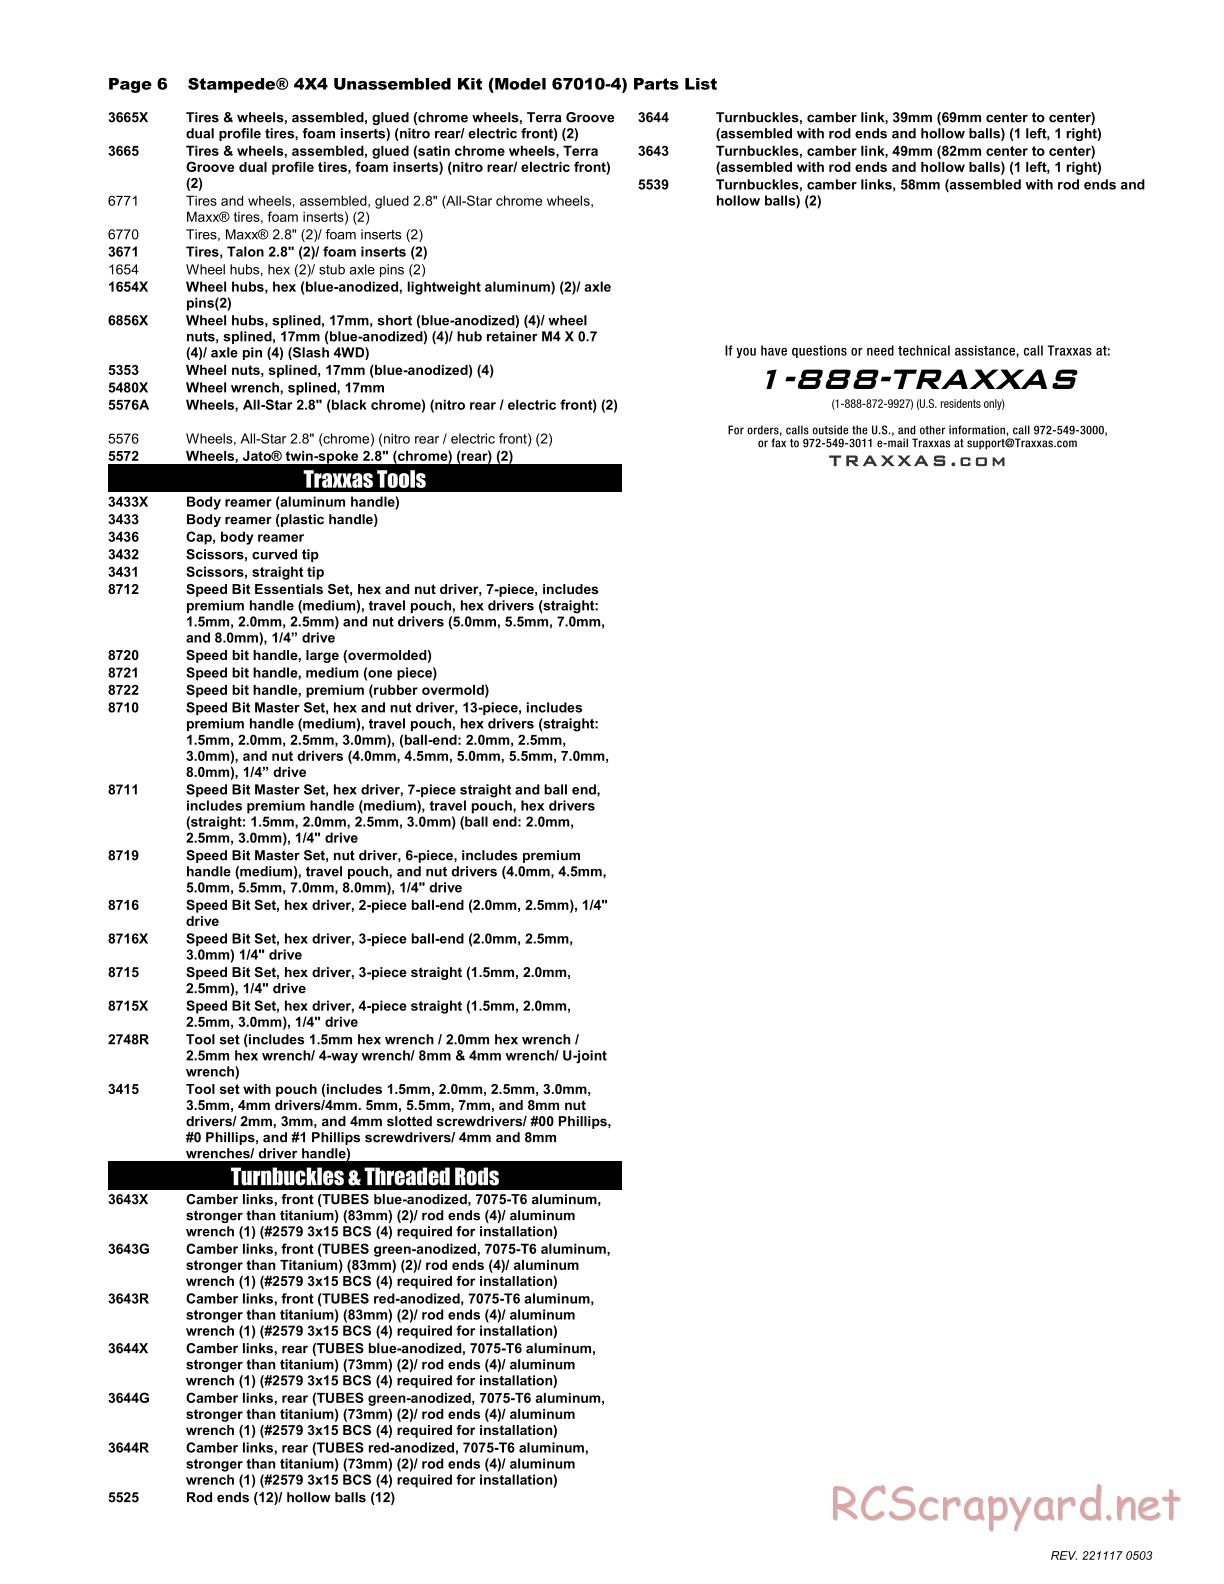 Traxxas - Stampede 4x4 (2019) - Parts List - Page 6